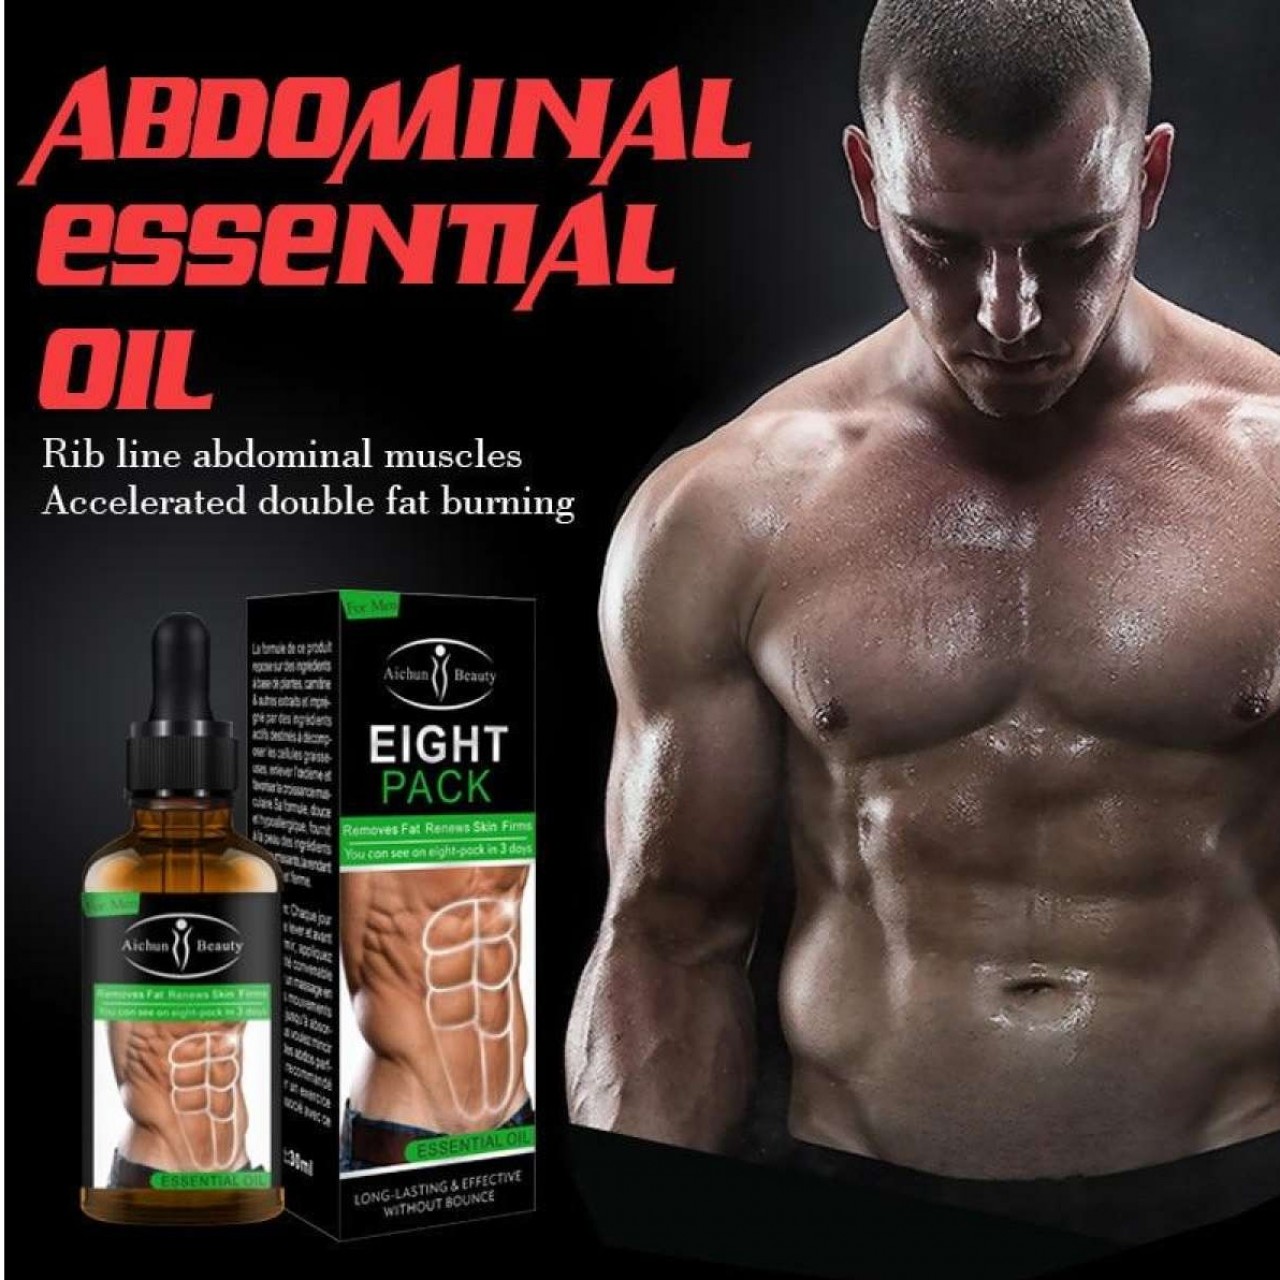 Eight Pack Slimming oil  For Men - Powerful Abdominal Muscle Essential Oil - 40ML